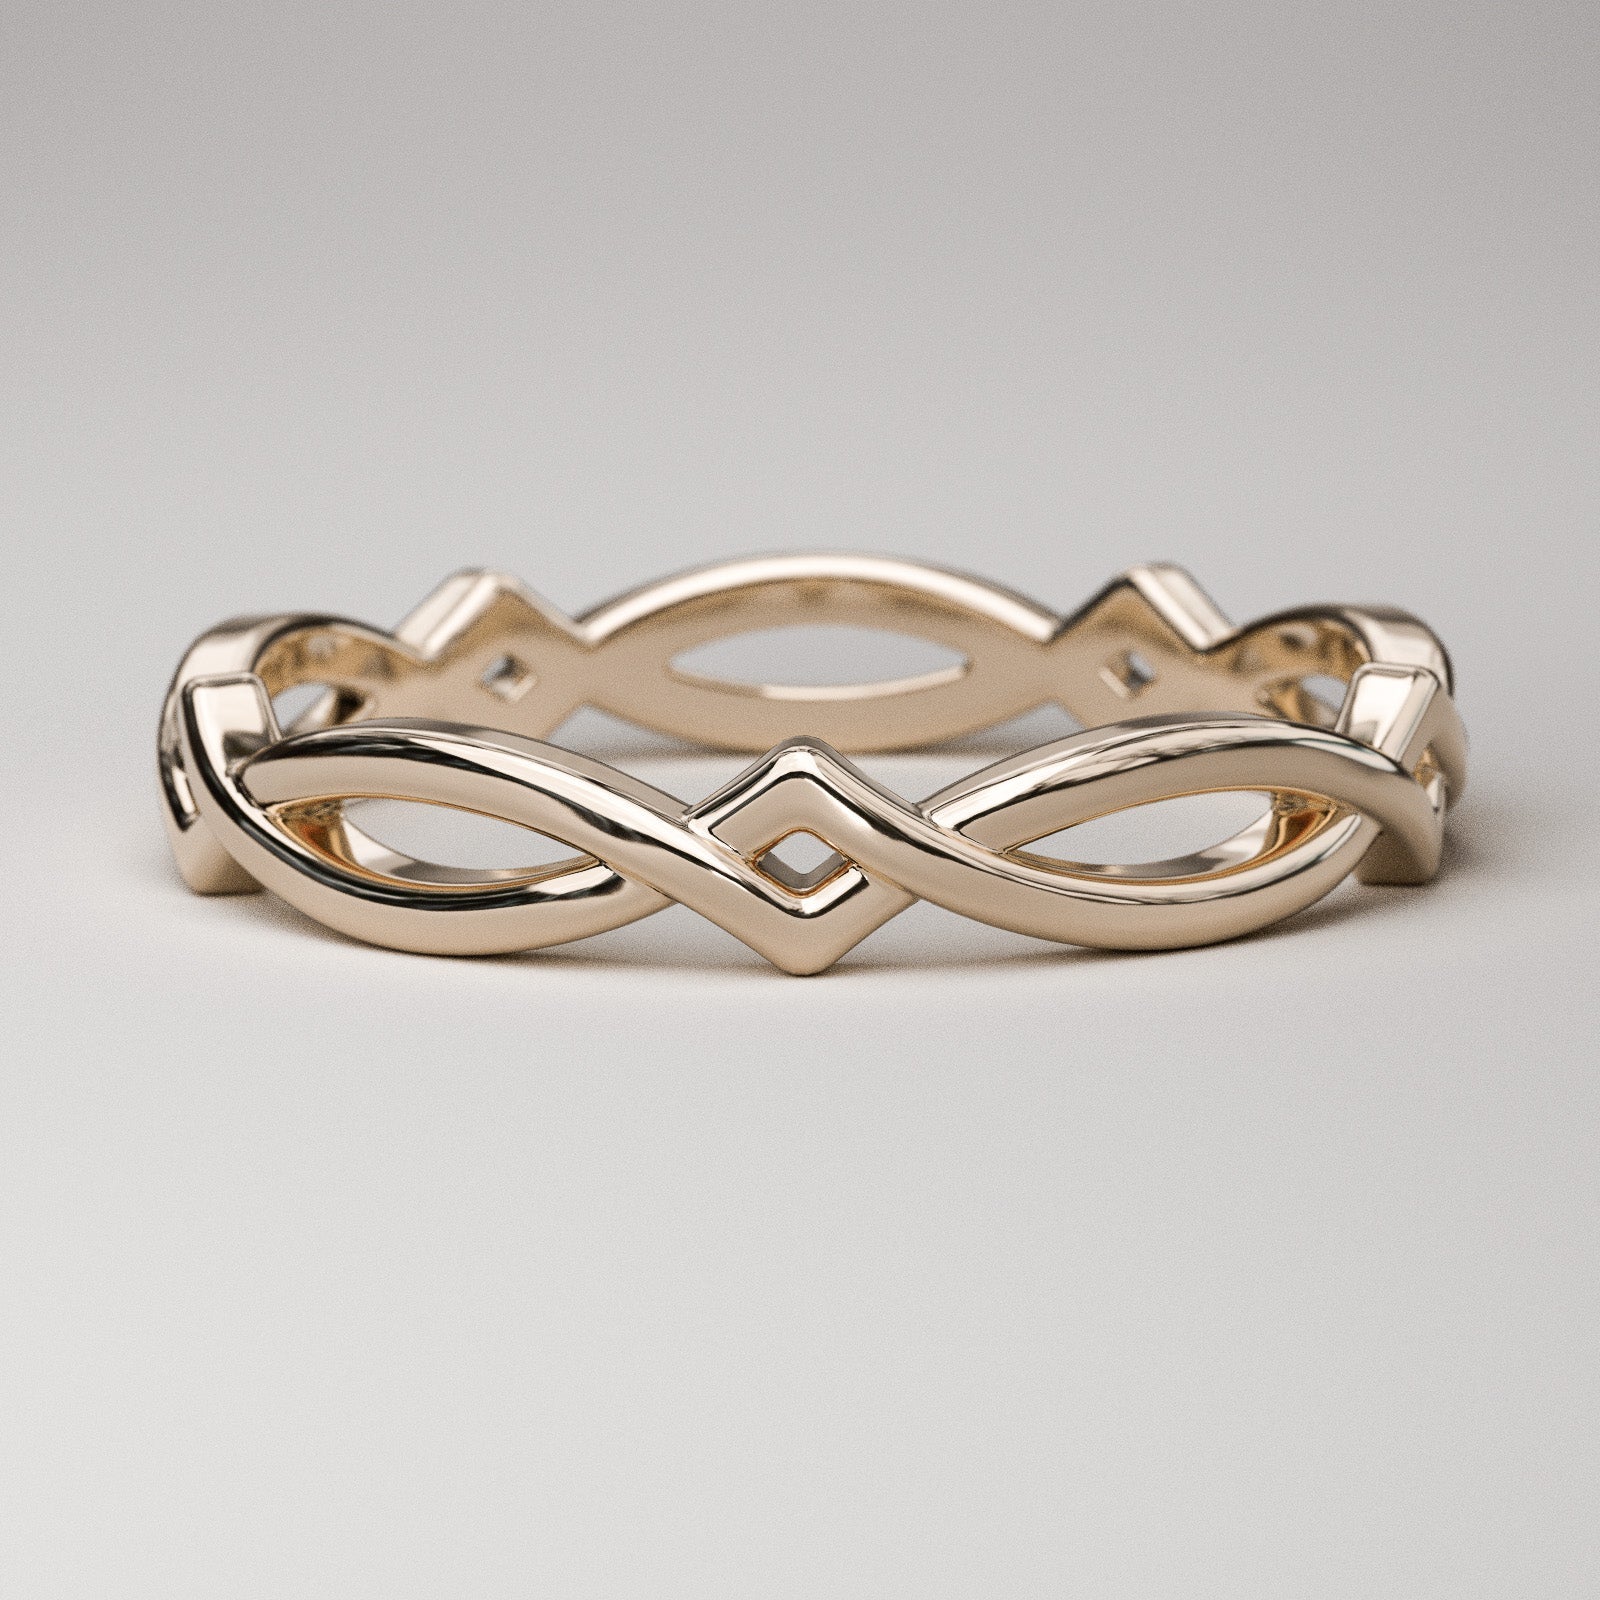 Woven gold band - A Celtic ring in solid rose gold